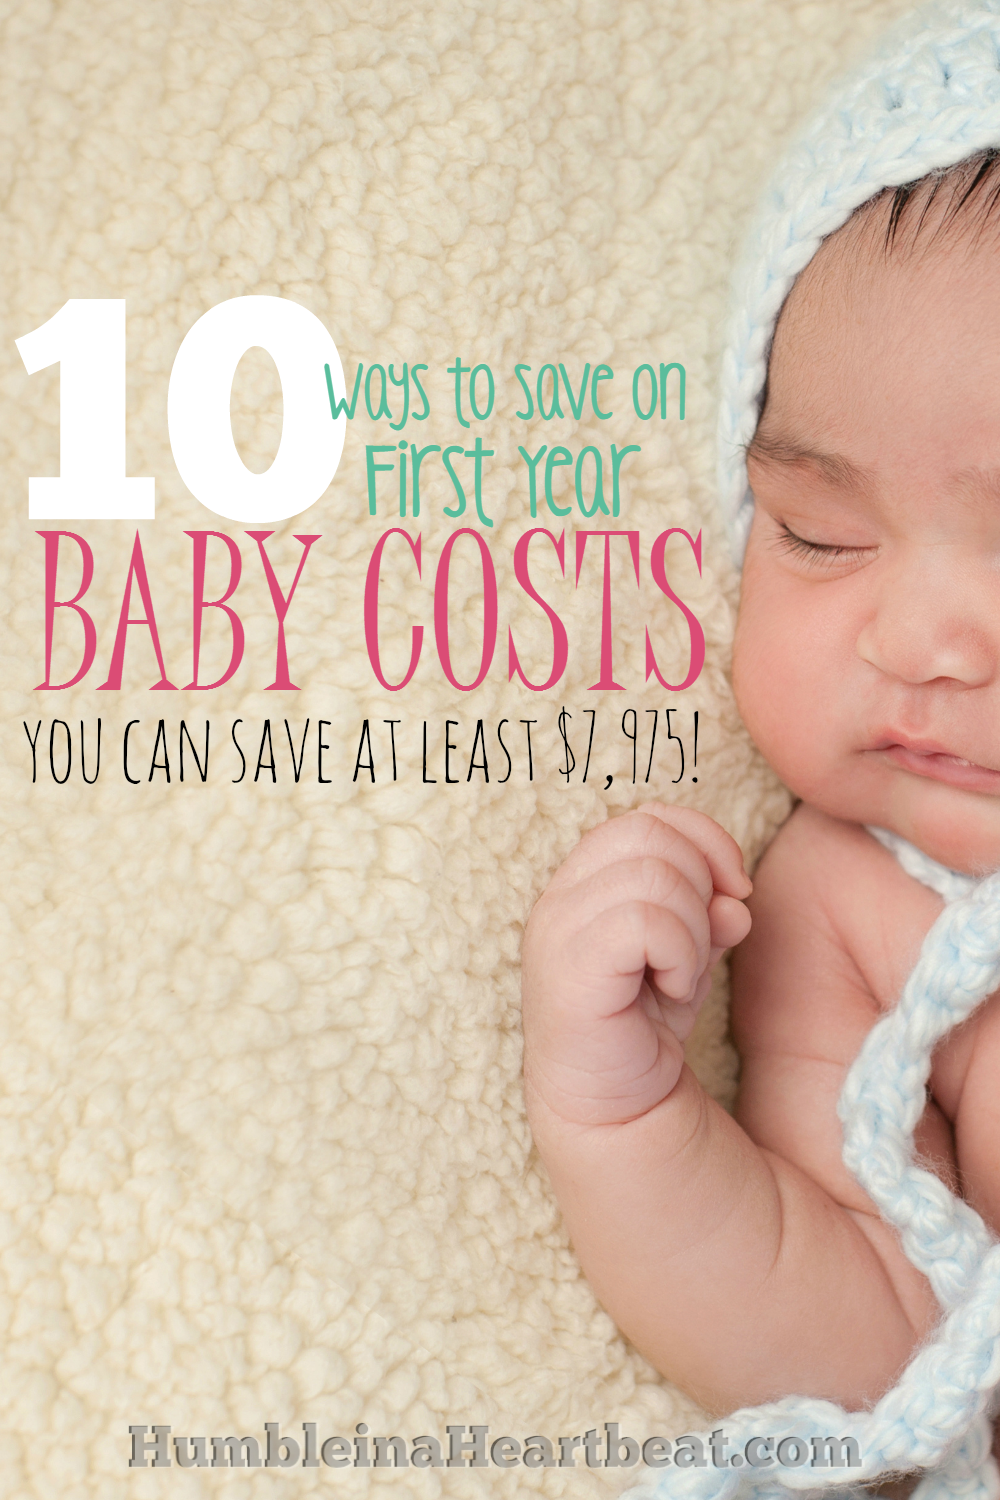 Babies are blessings but can come with a hefty price tag! Here are 10 ways you can cut costs on the first year.